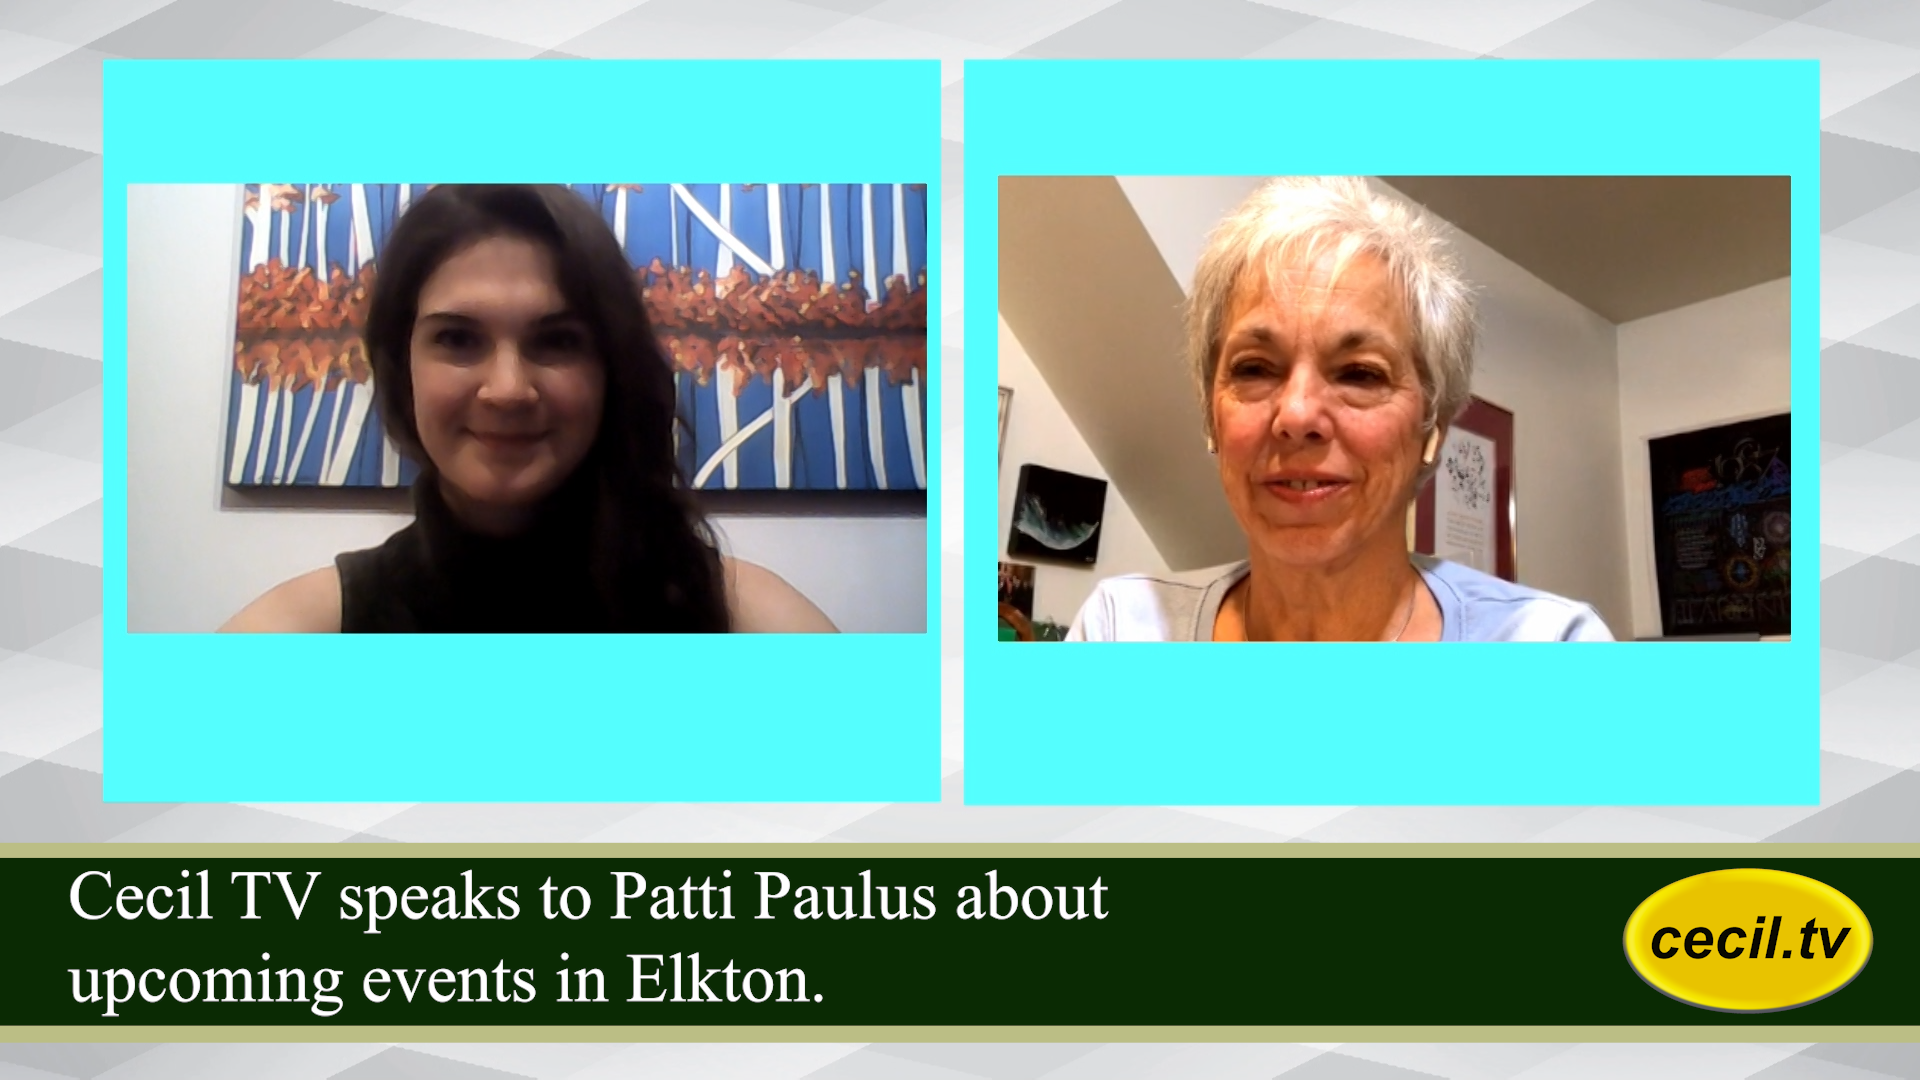 Cecil TV speaks to Patti Paulus about upcoming events in Elkton.